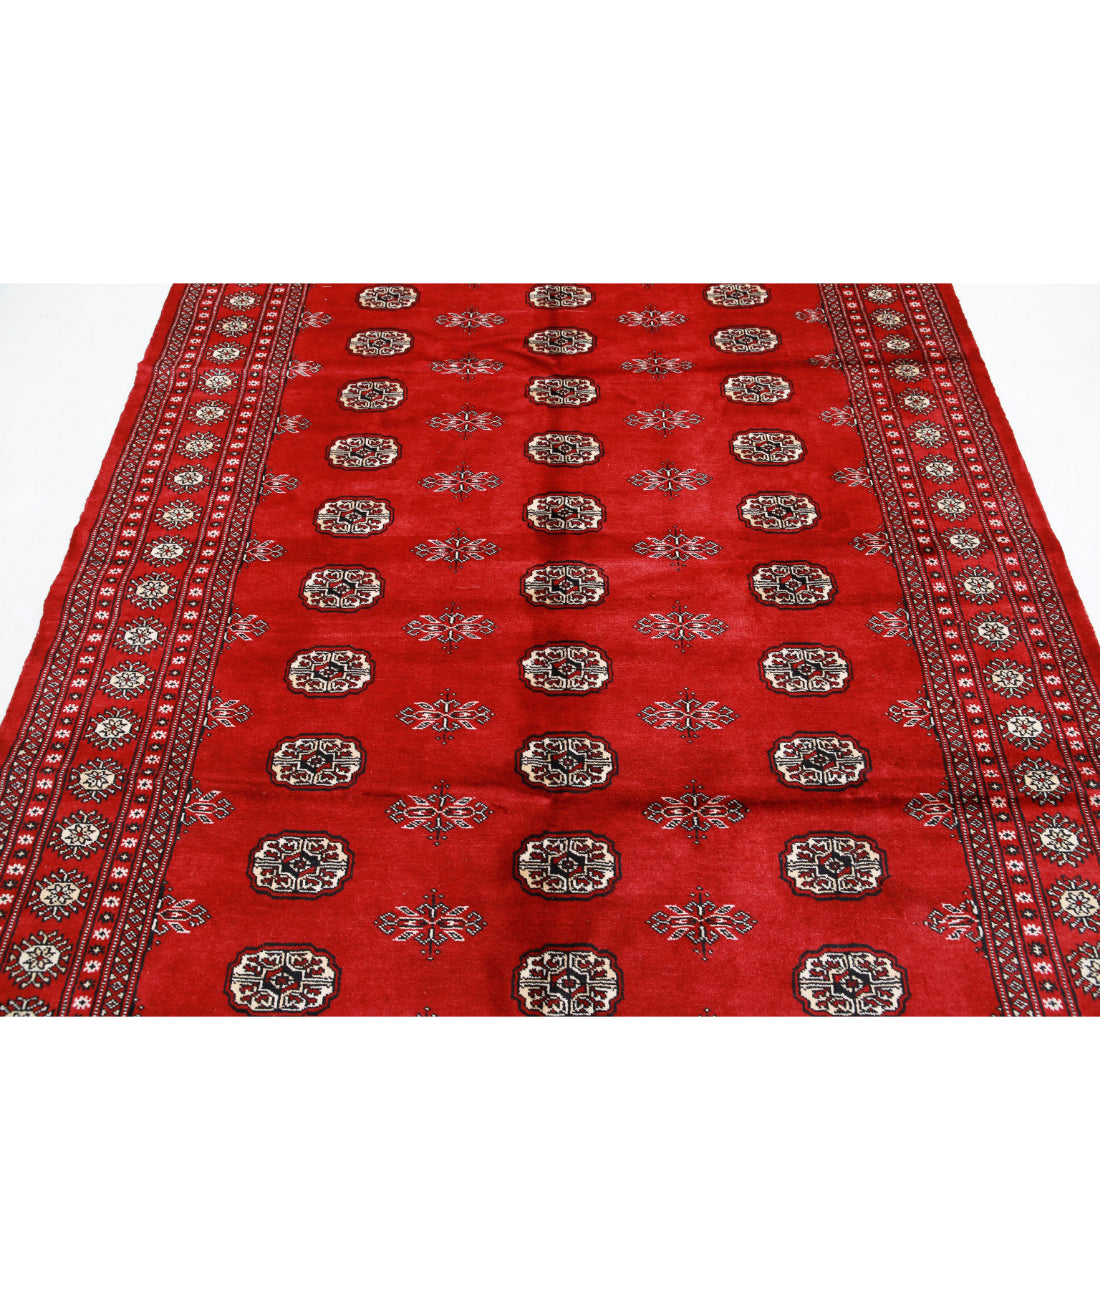 Hand Knotted Tribal Bokhara Wool Rug - 6'1'' x 8'11'' 6'1'' x 8'11'' (183 X 268) / Red / Ivory